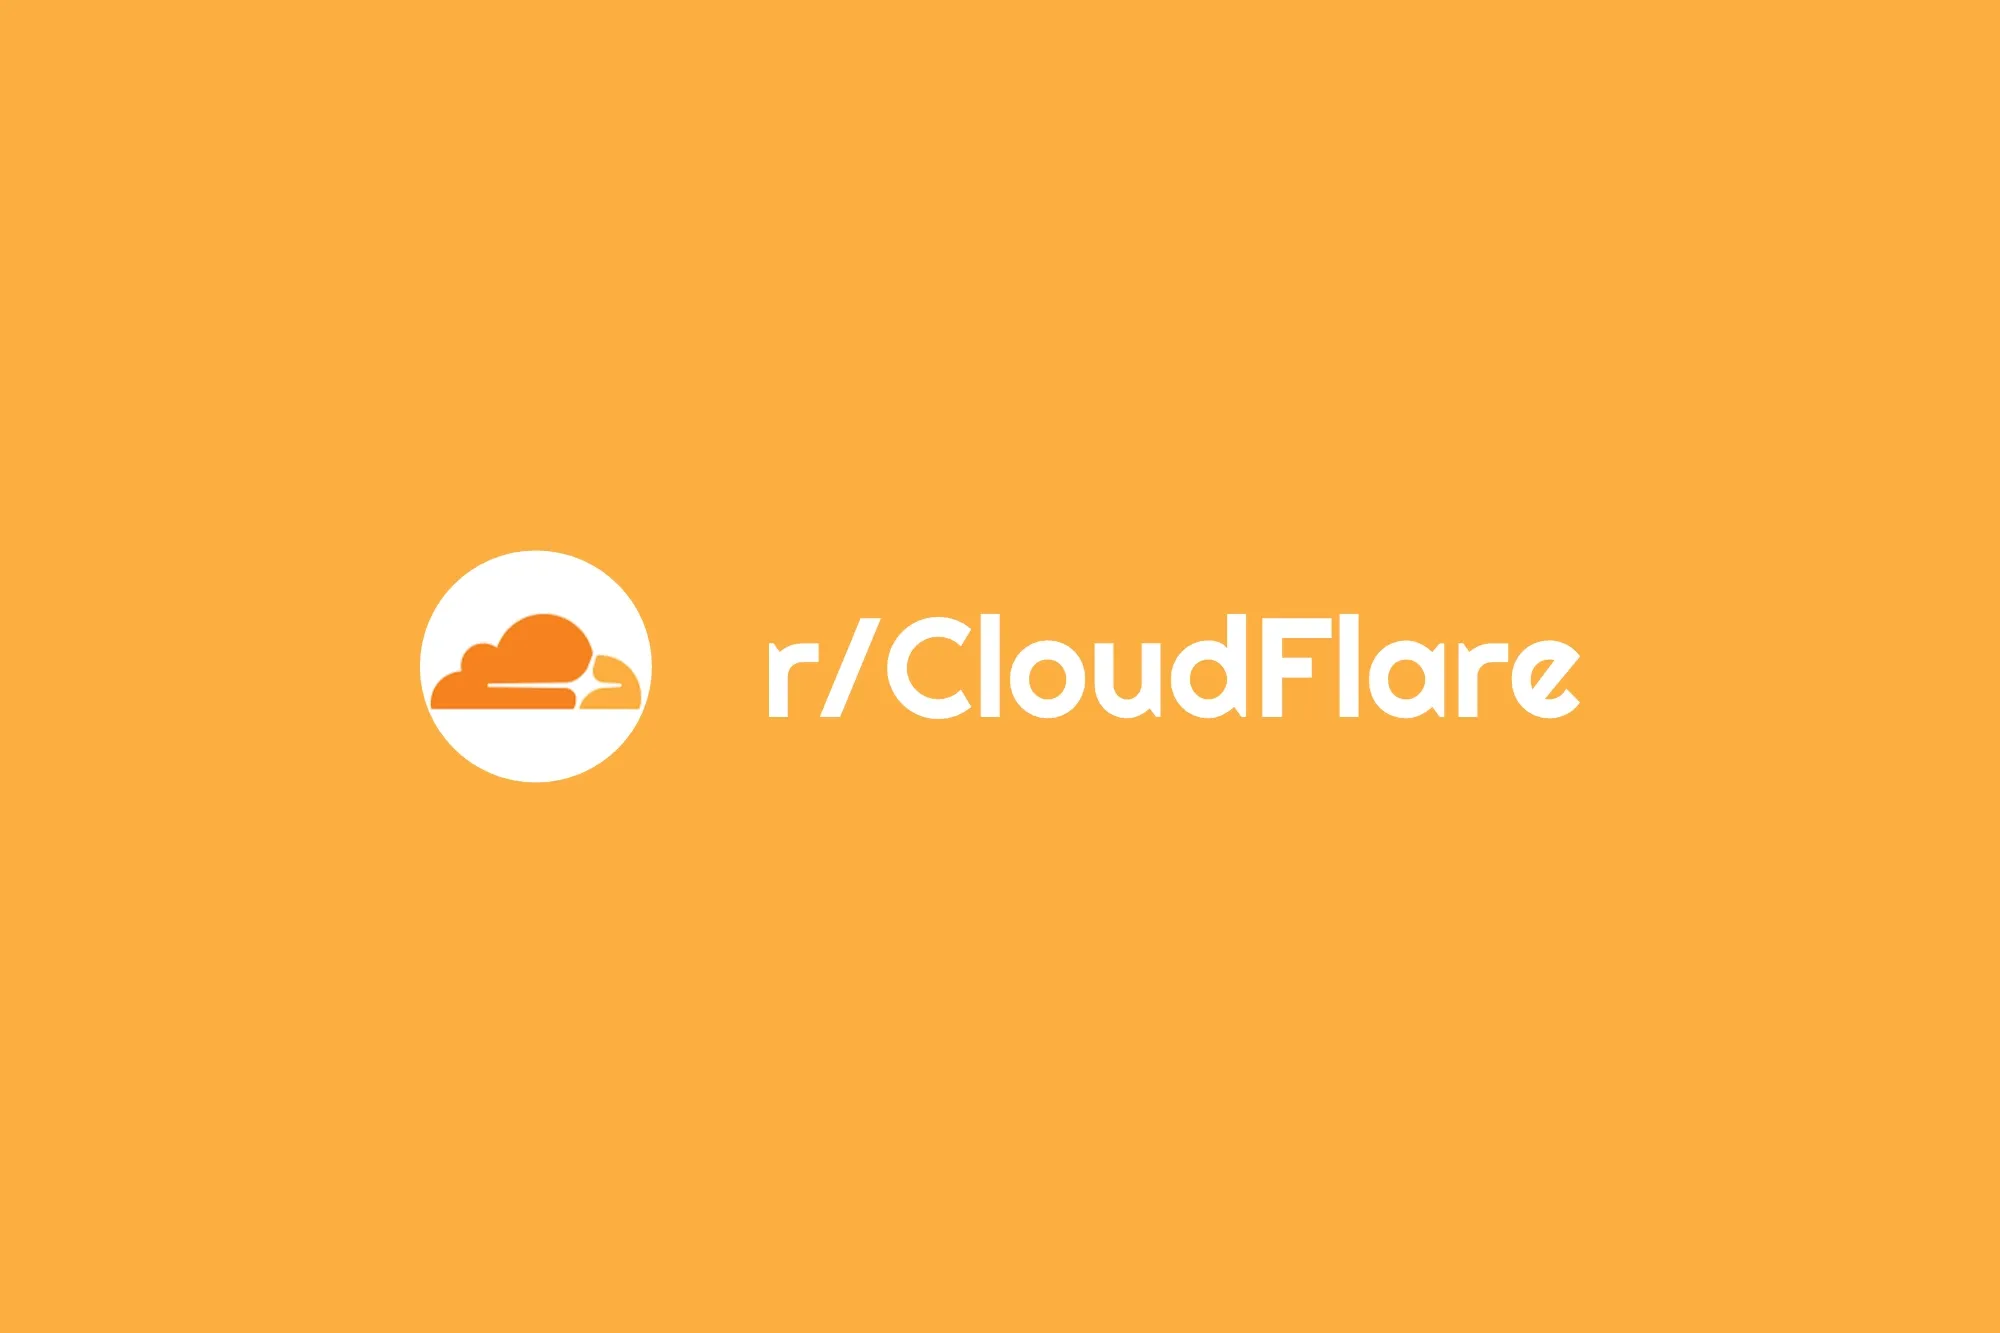 r/CloudFlare: Help with SPF and DKIM using office 365 when CLOUDFLARE is registrar